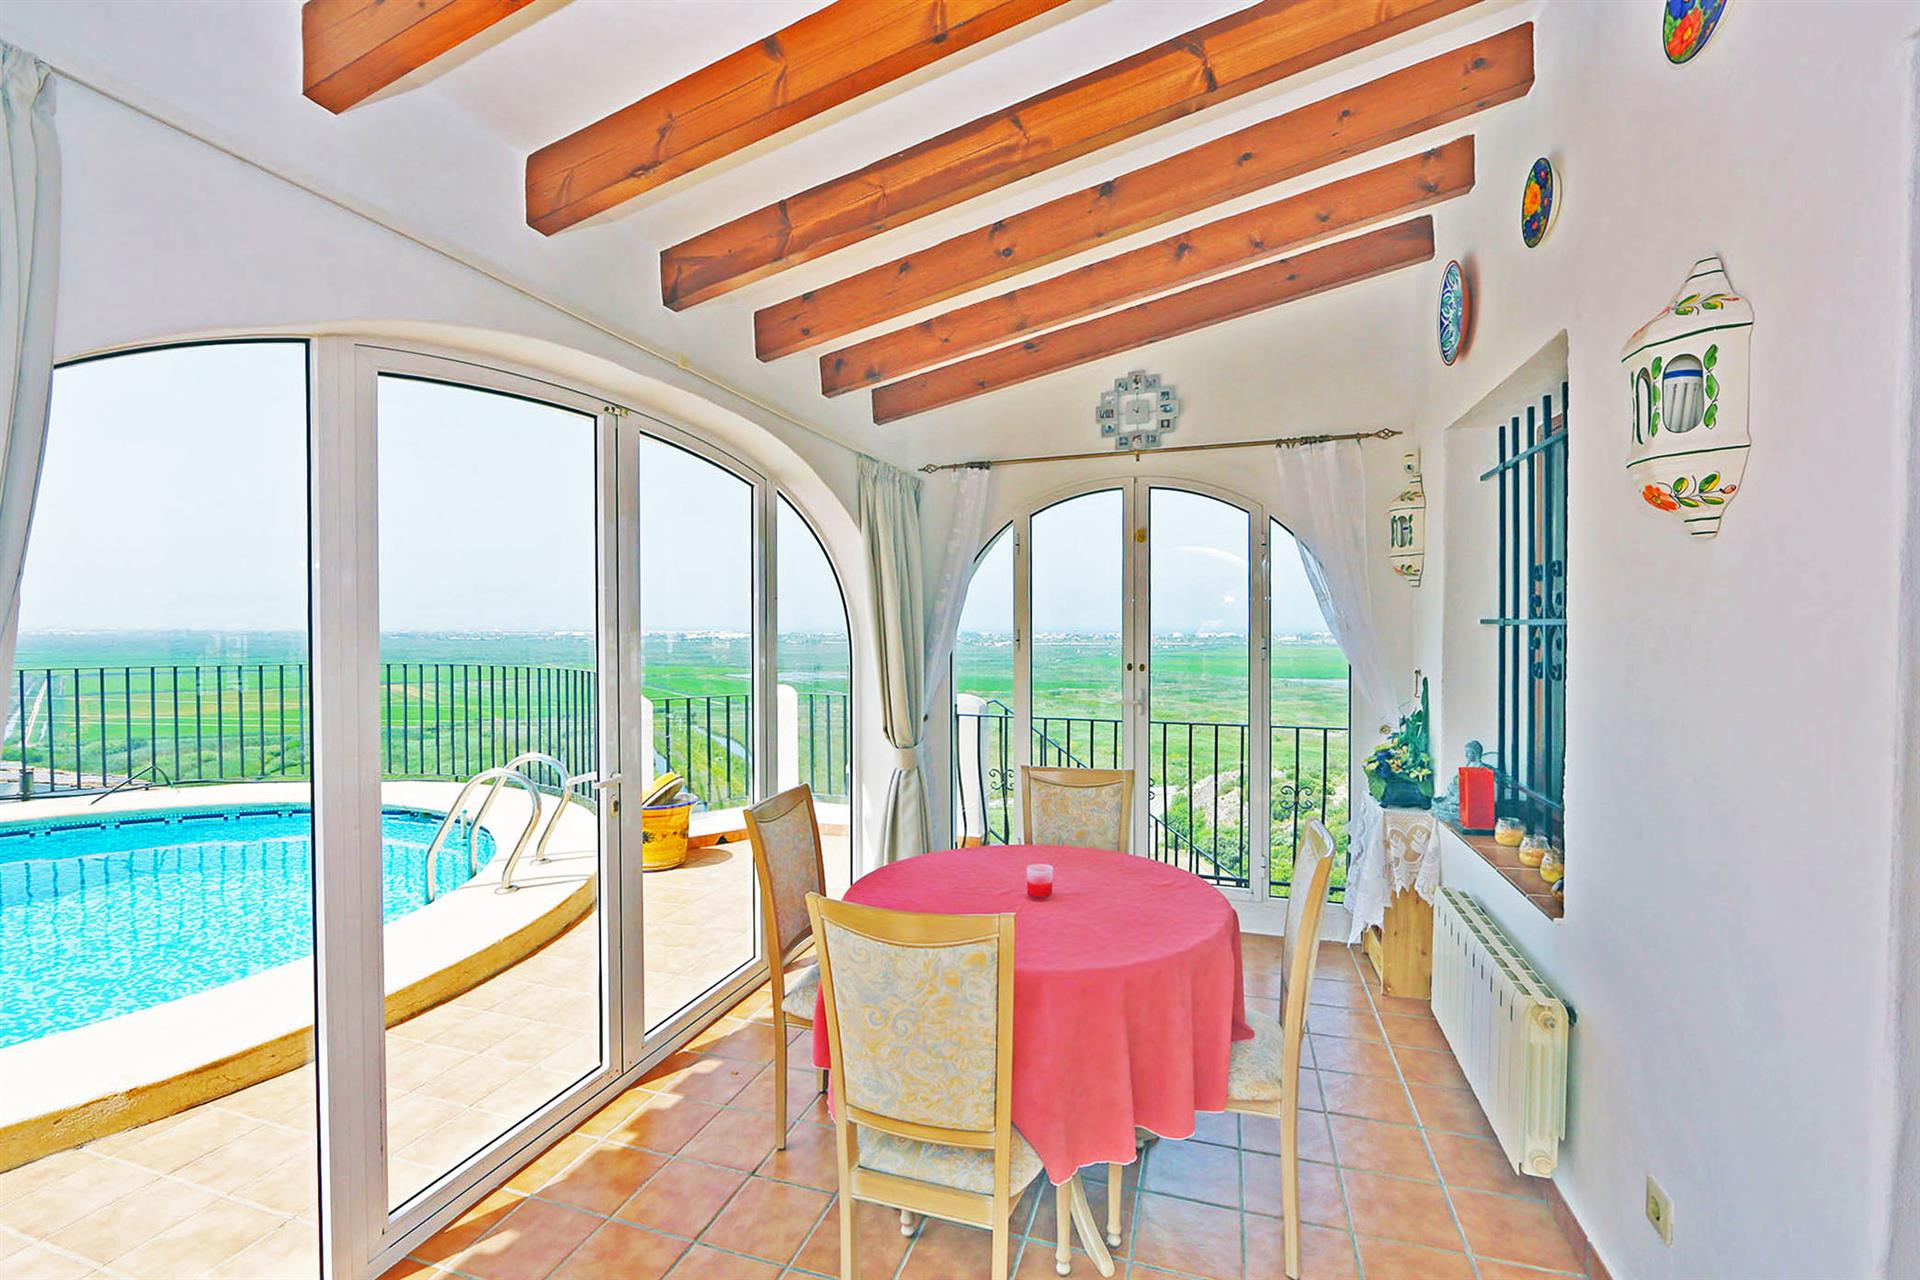 Villa with 3 separate apartments, pool and sea view in Monte Pego